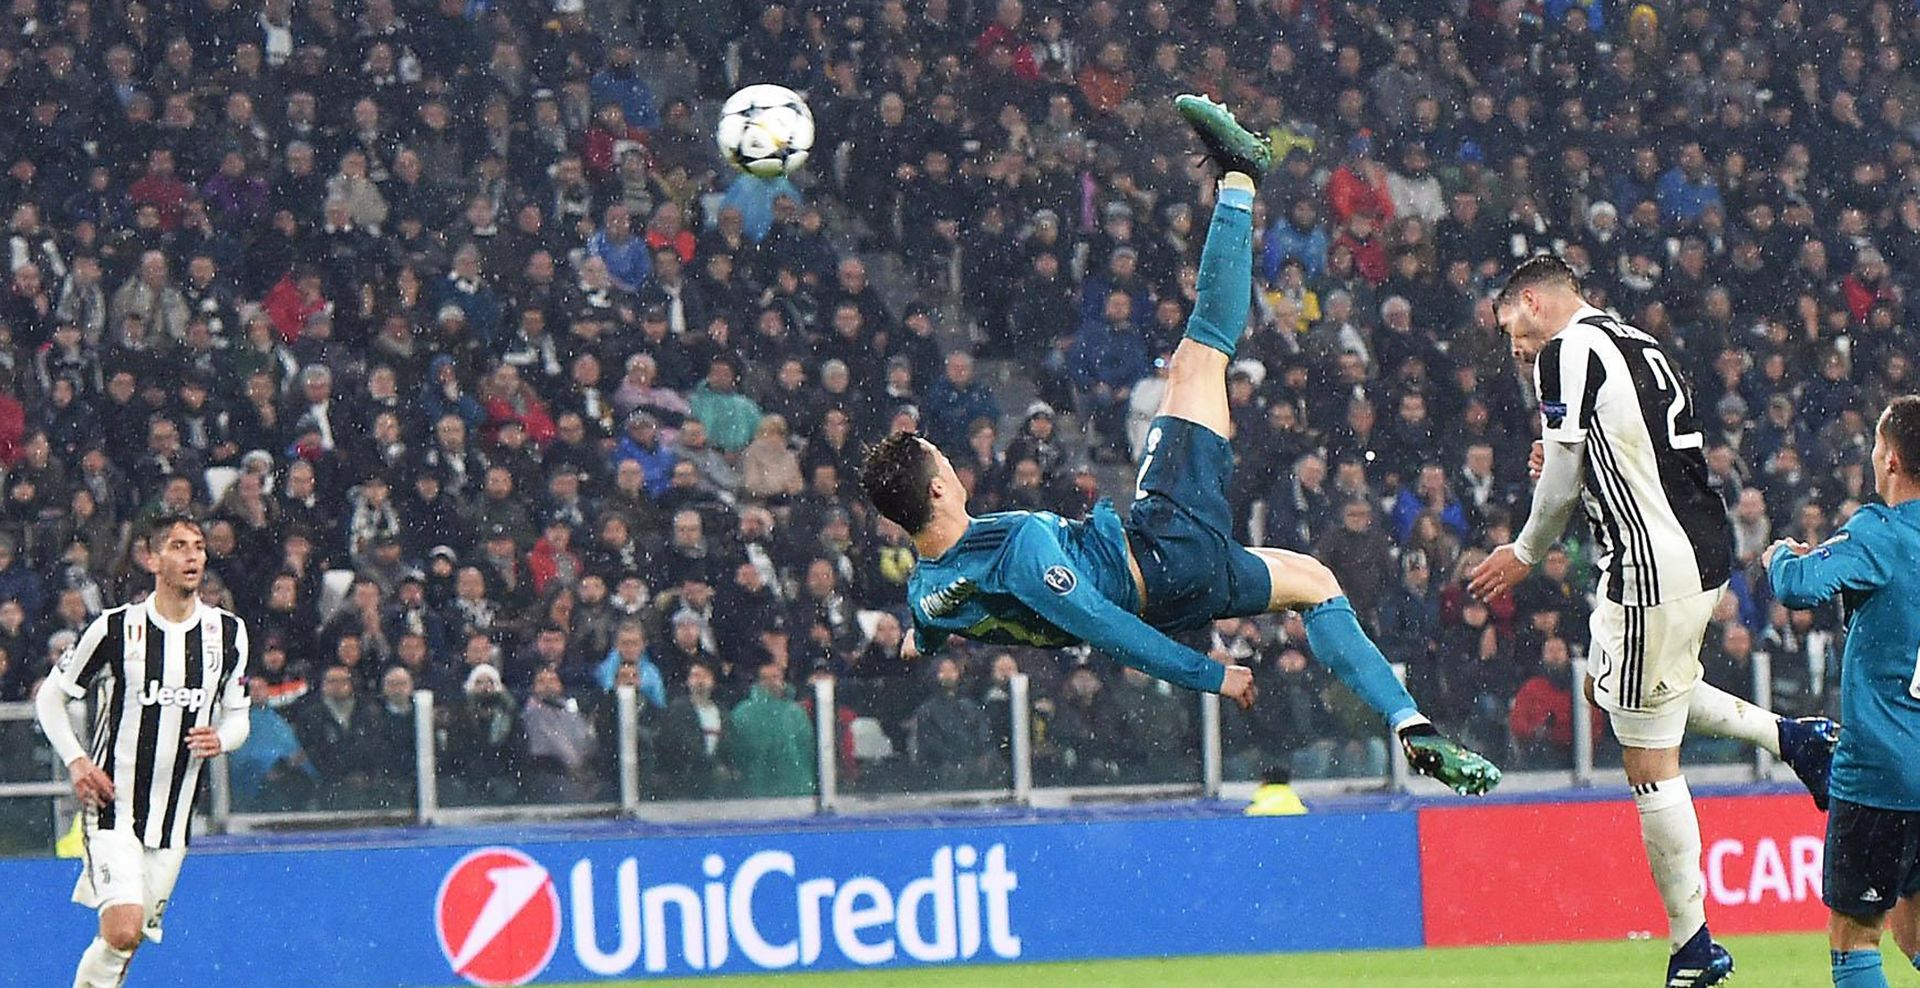 epa06644064 Real Madrid's Cristiano Ronaldo (C) scores the 2-0 goal during the UEFA Champions League quarter final first leg soccer match between Juventus FC vs Real Madrid CF at Allianz stadium in Turin, Italy, 03 April 2018.  EPA/ANDREA DI MARCO